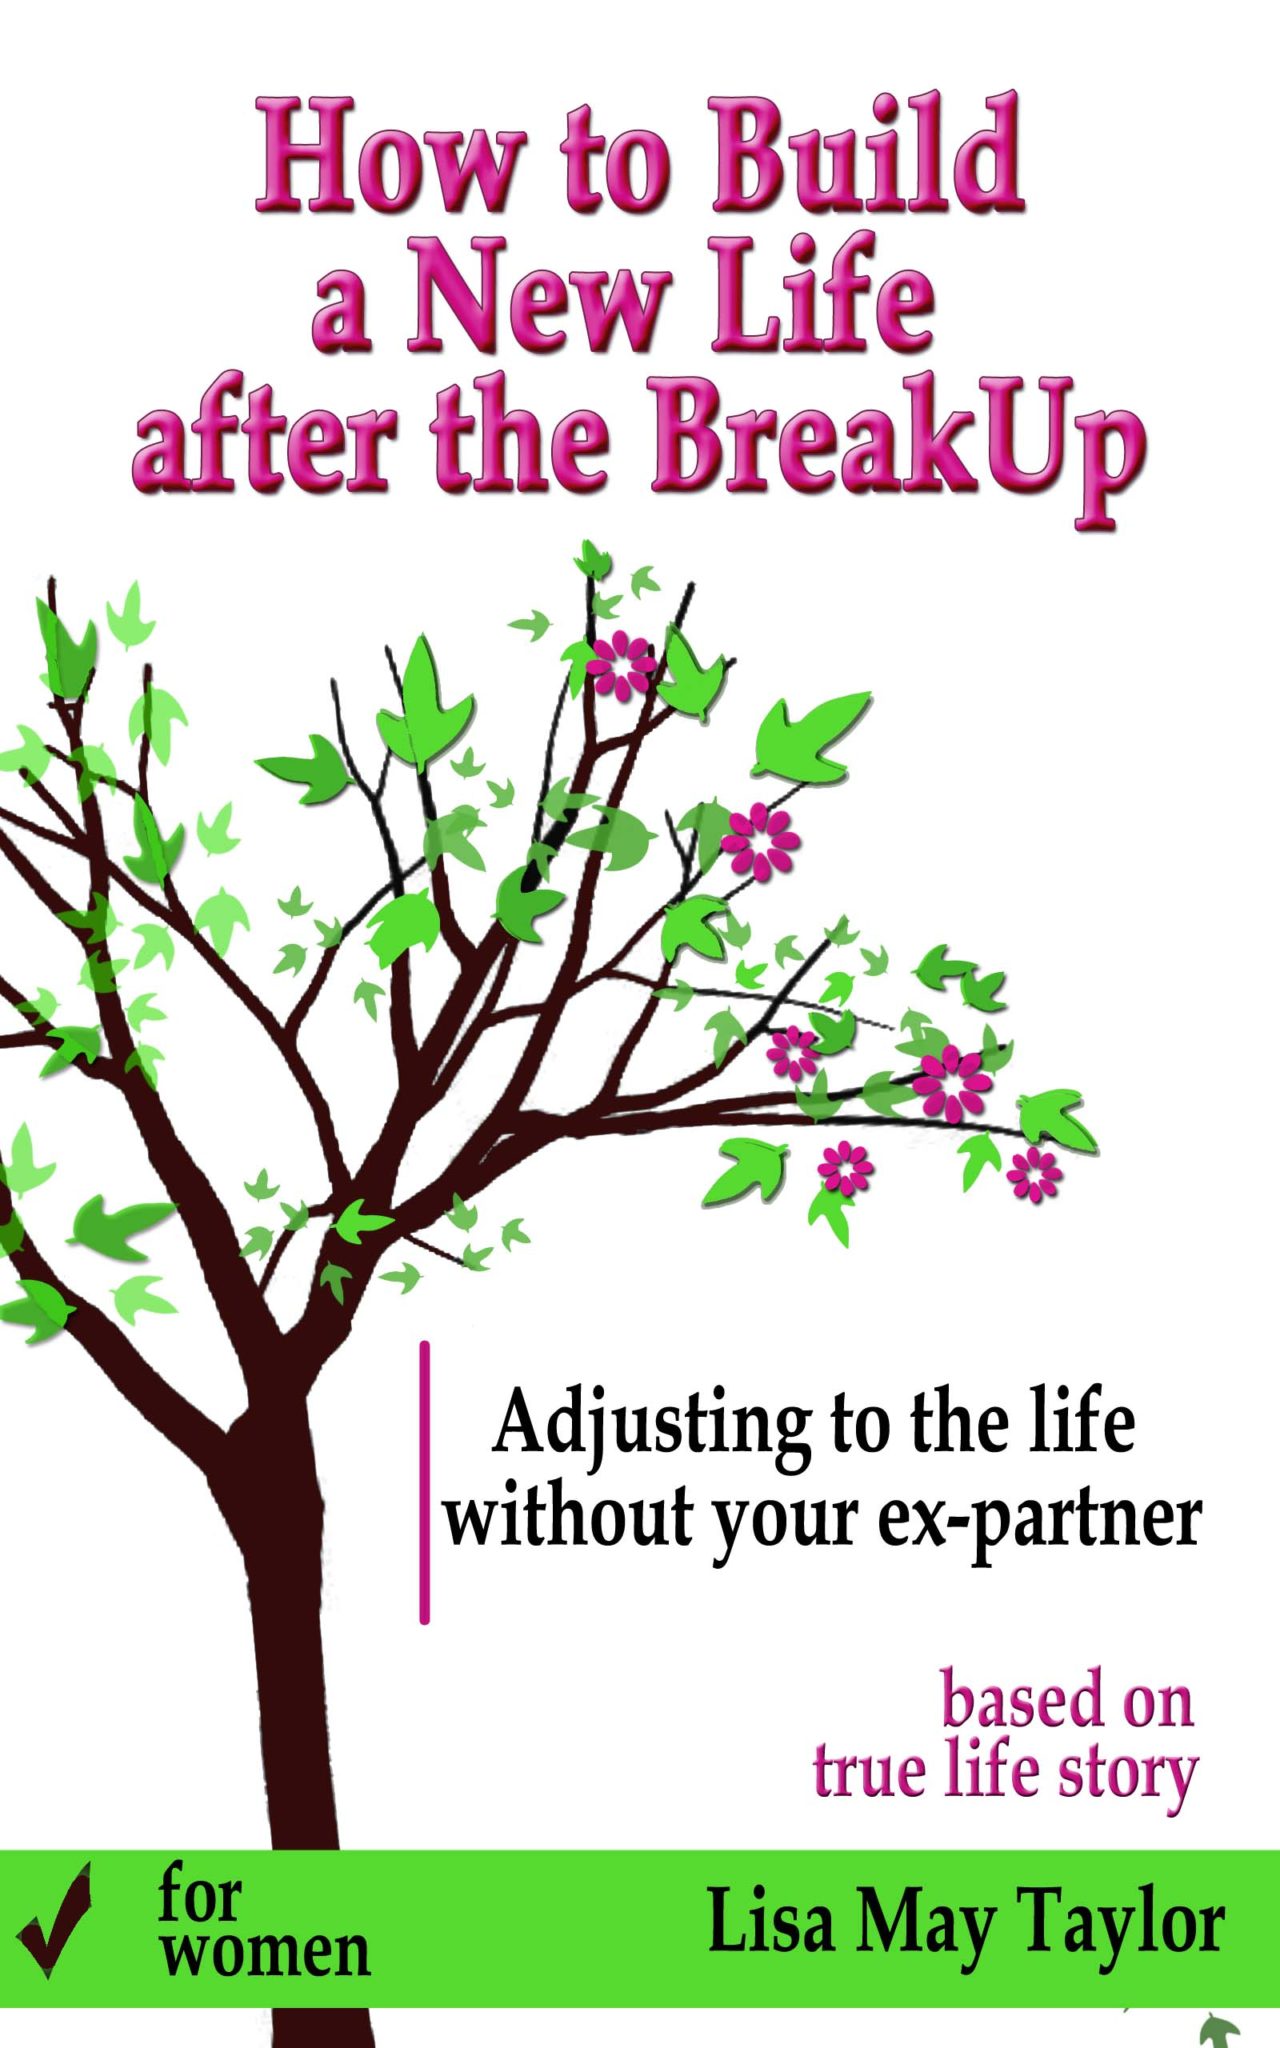 FREE: How to Build a New Life after the Breakup: Adjusting to the Life without Your Ex-partner: A Recovery Guide for Women by Lisa May Taylor